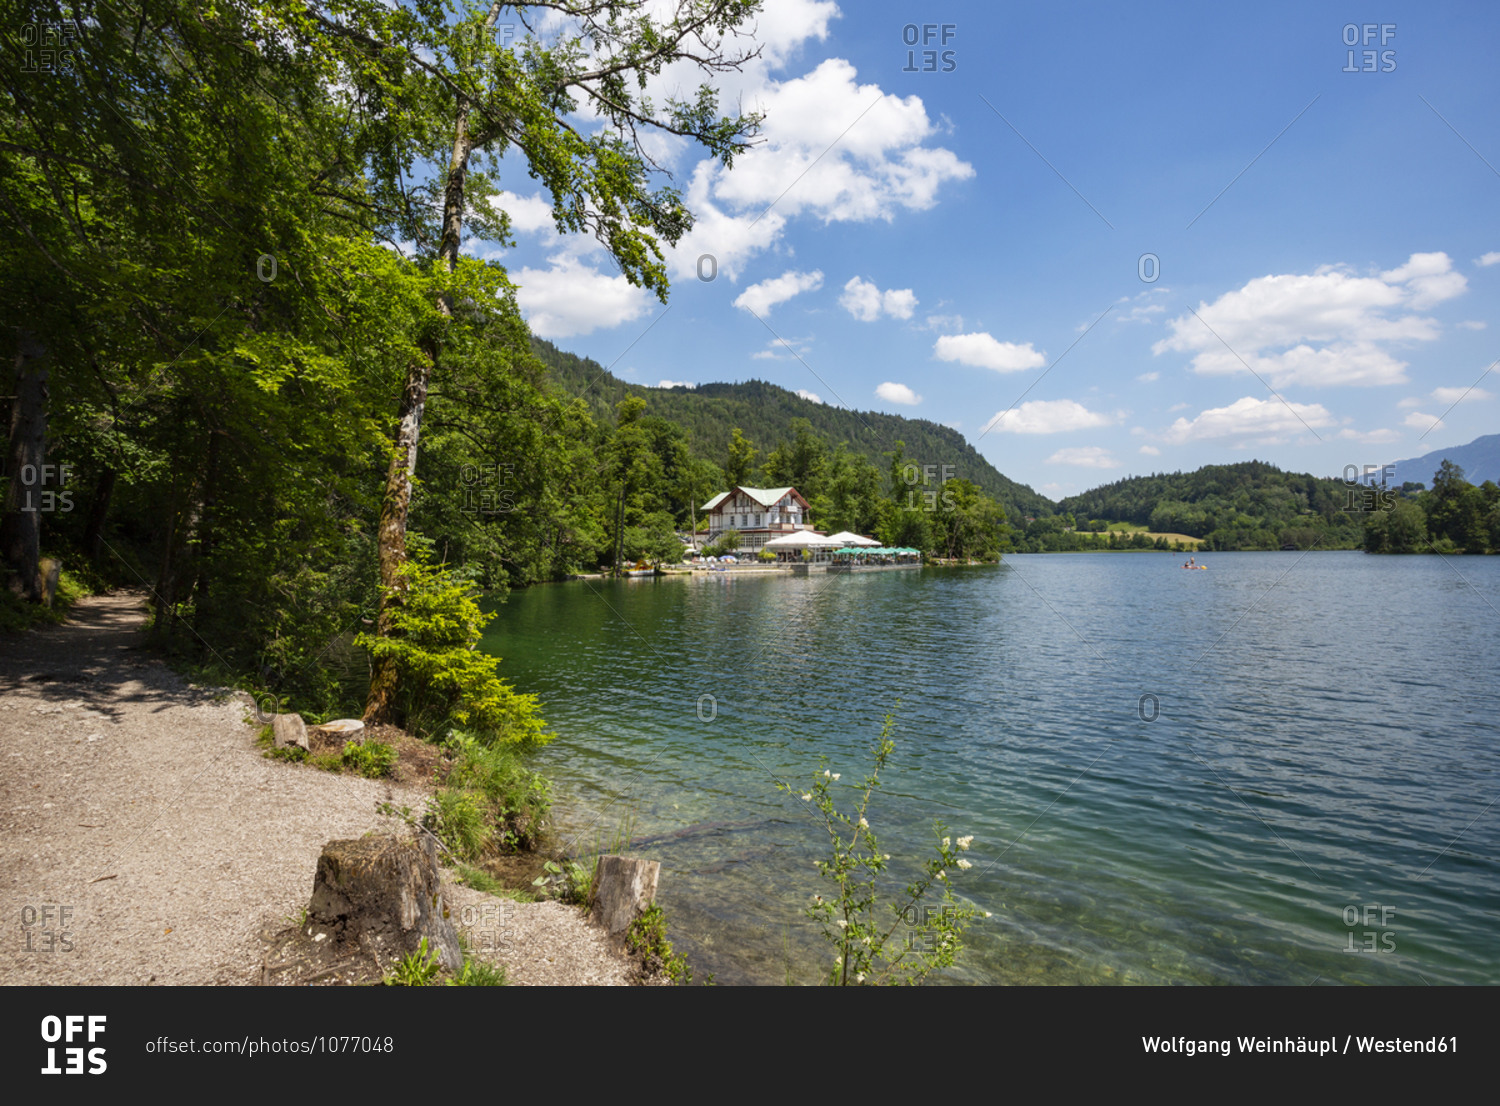 Germany- Bavaria- Bad Reichenhall- Shore of Thumsee lake in summer with restaurant in background